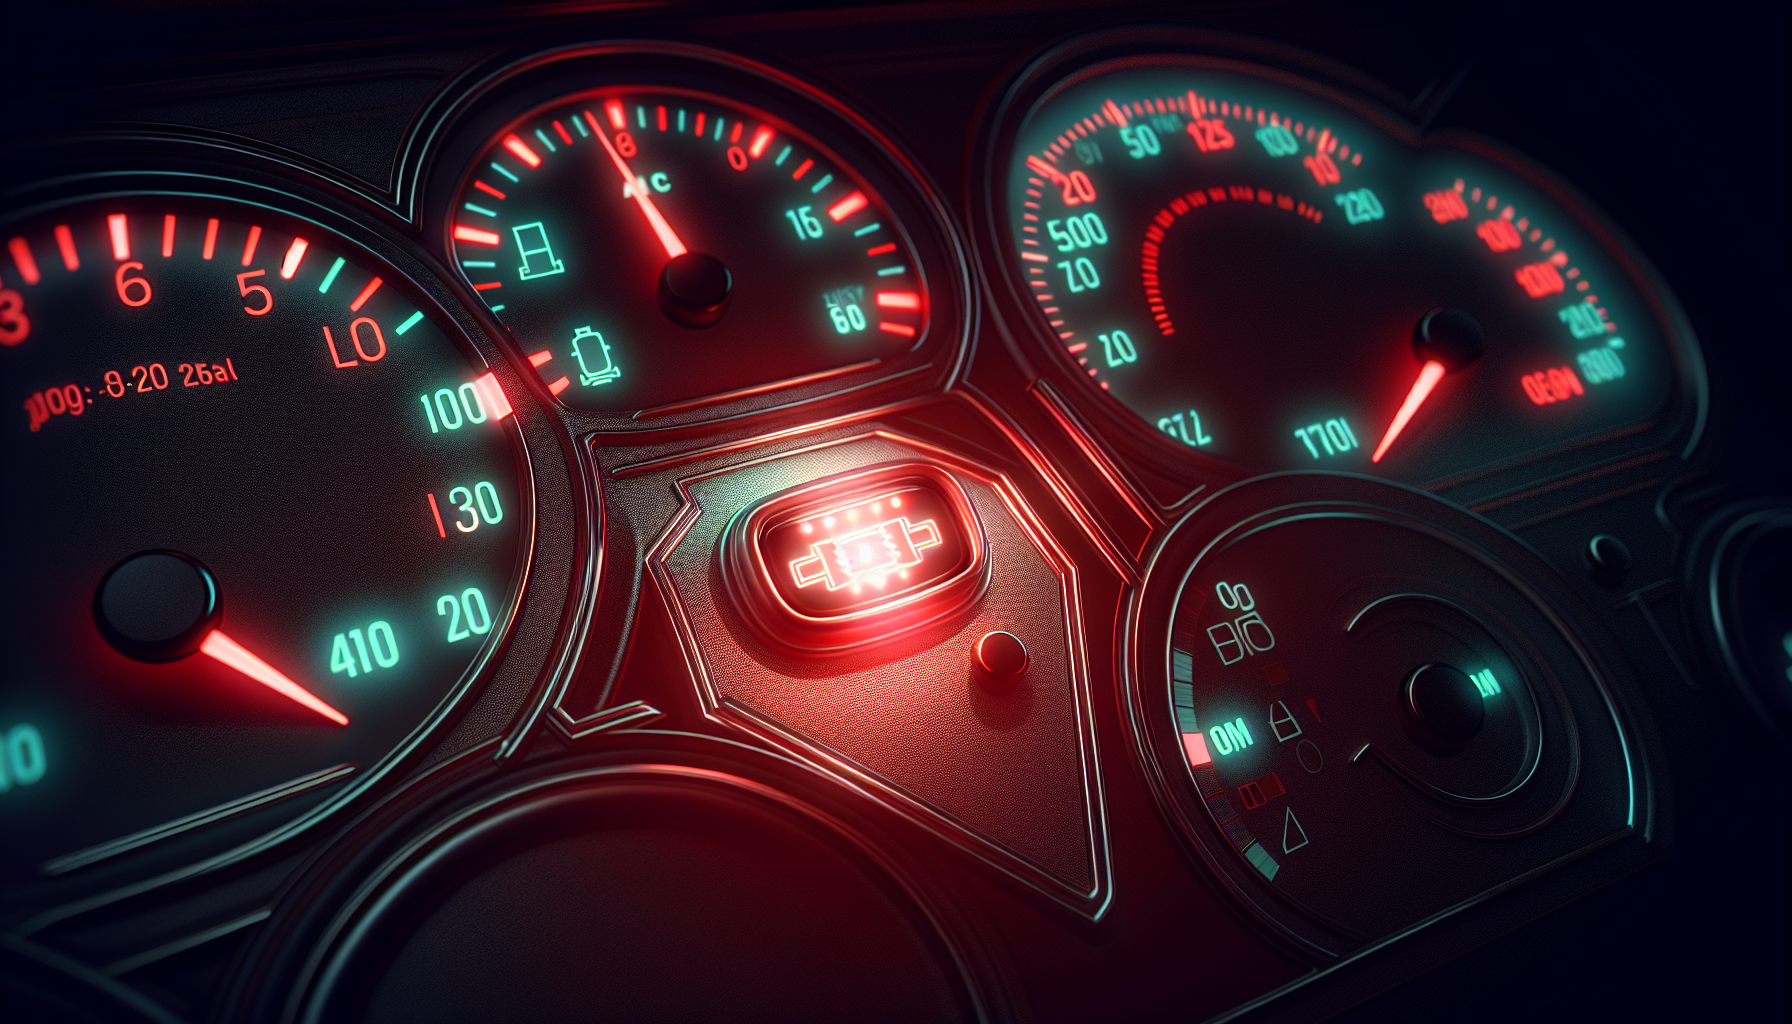 Illustration of a dashboard with a lit check engine light